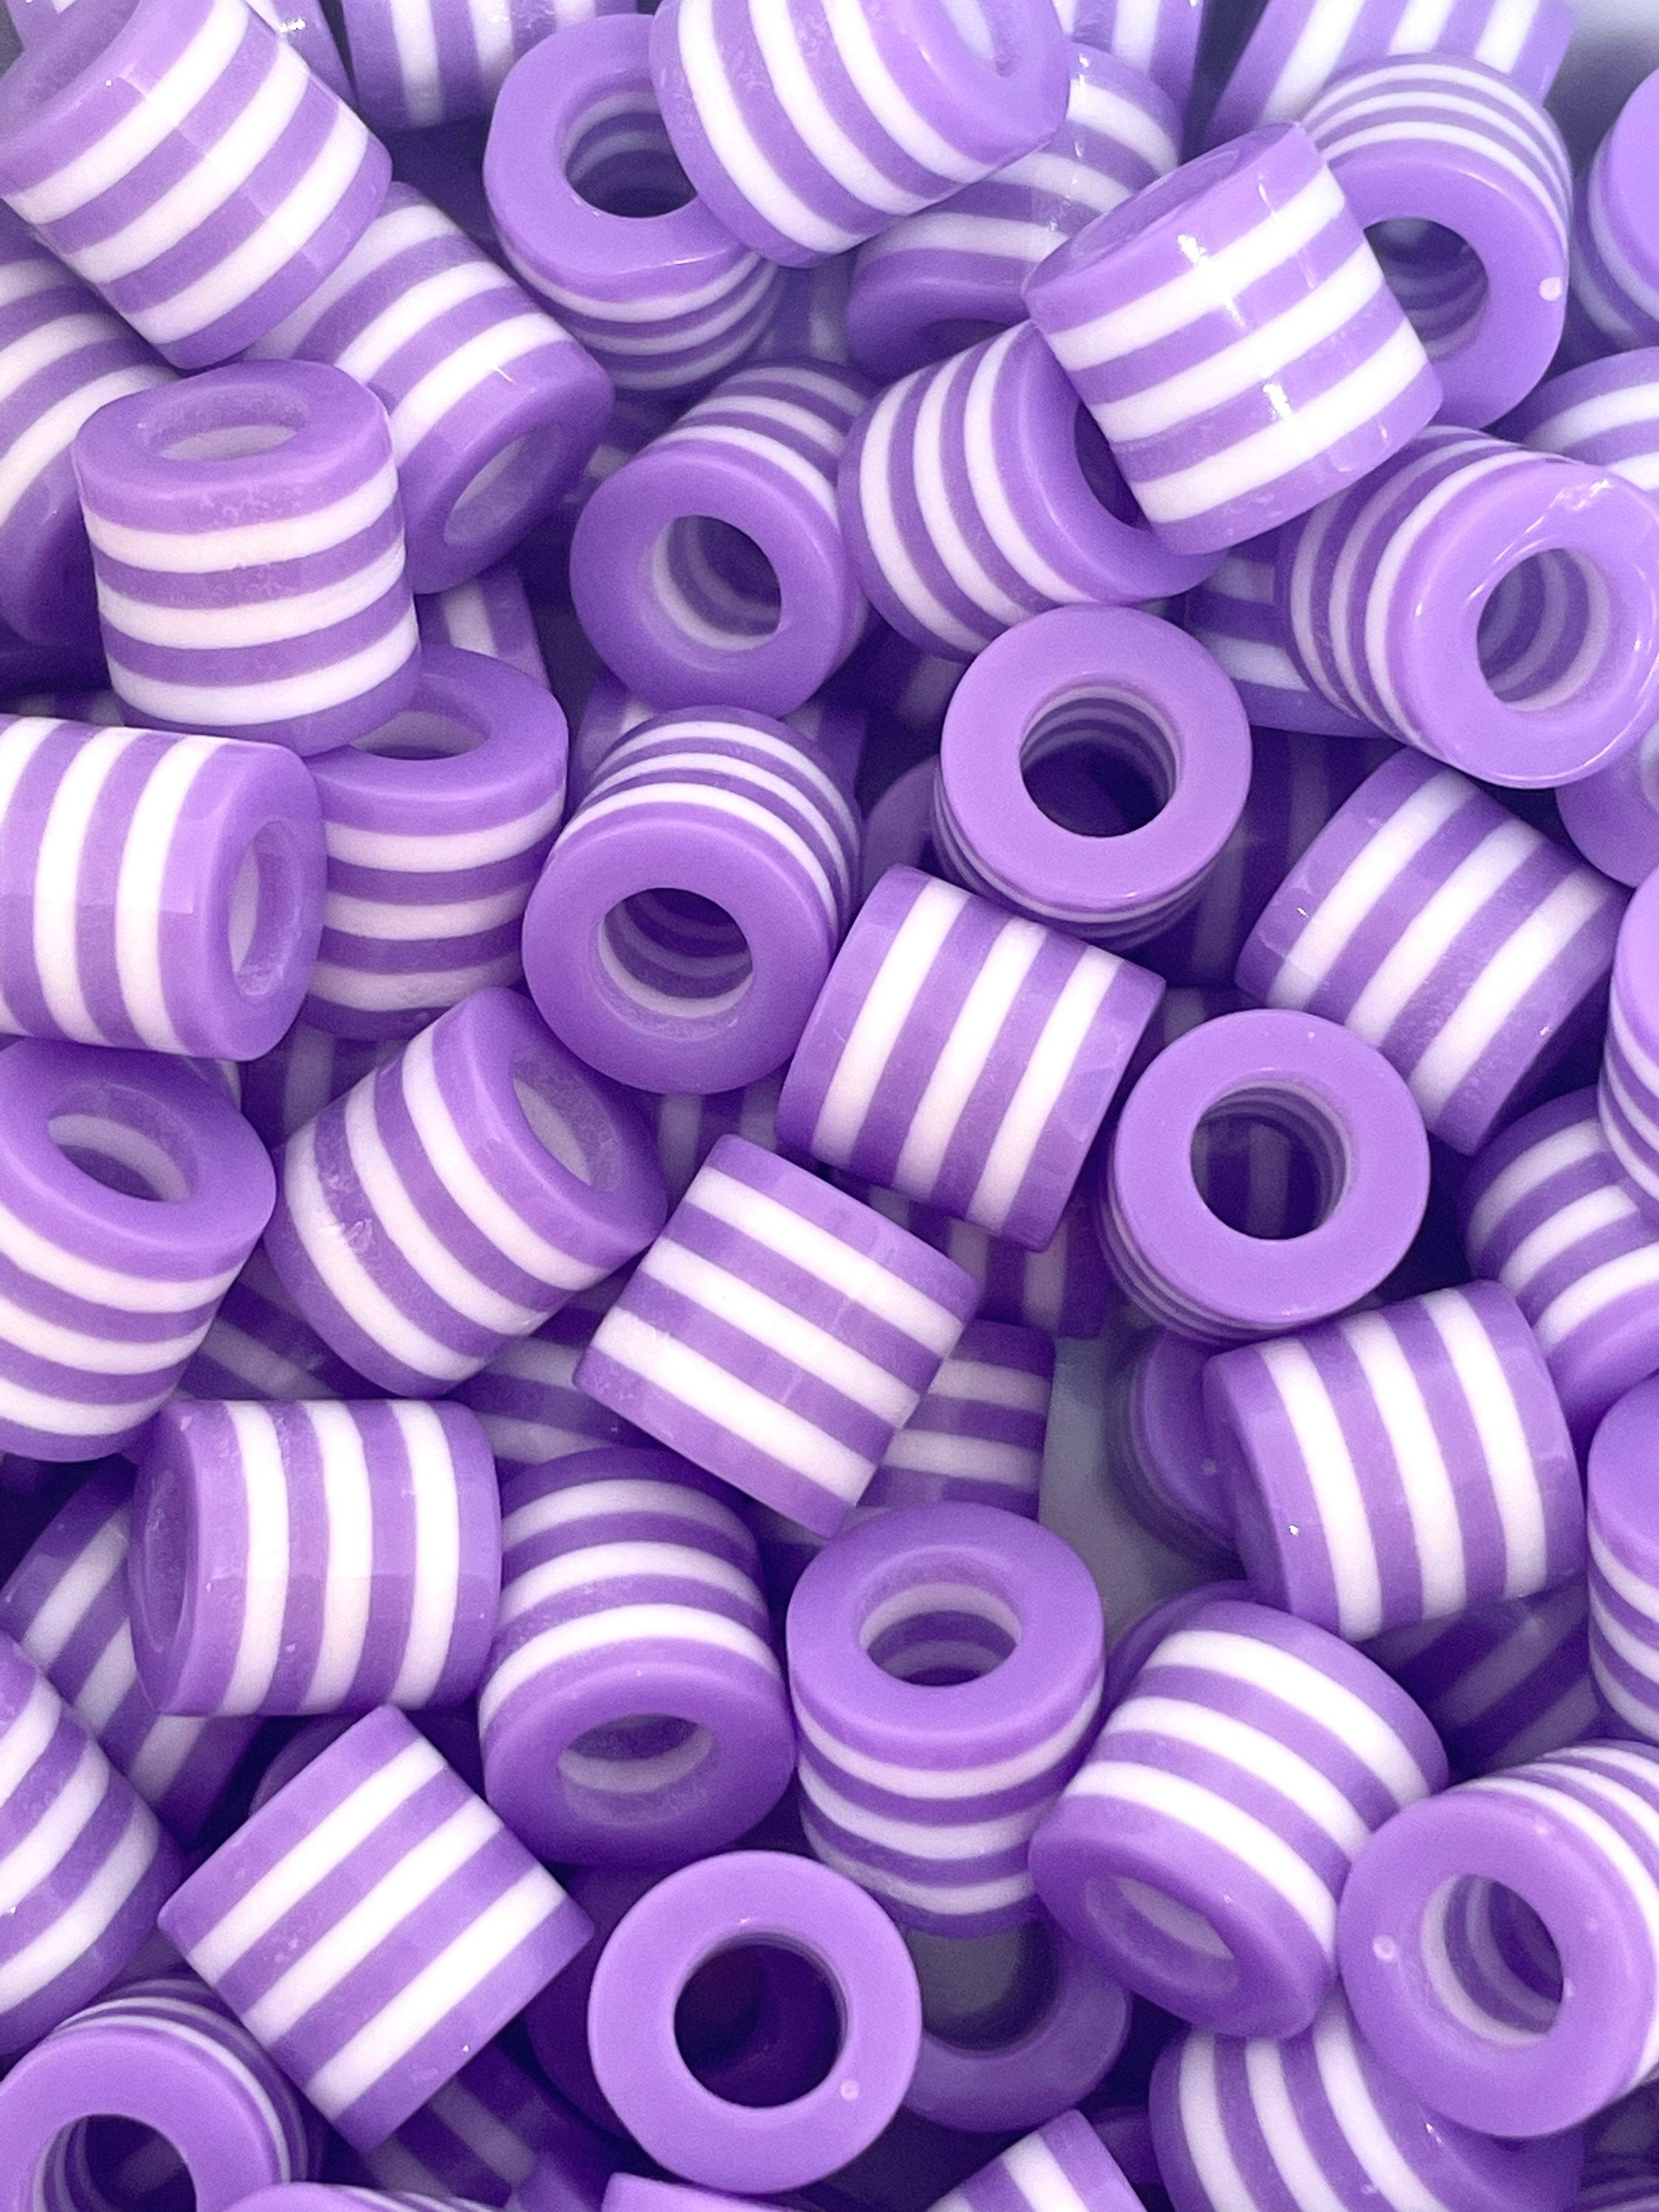 Purple Striped Drum Beads for Jewelry Making, Bracelet, Necklace, Hair, Striped Beads, Purple Beads, Lavender Themed